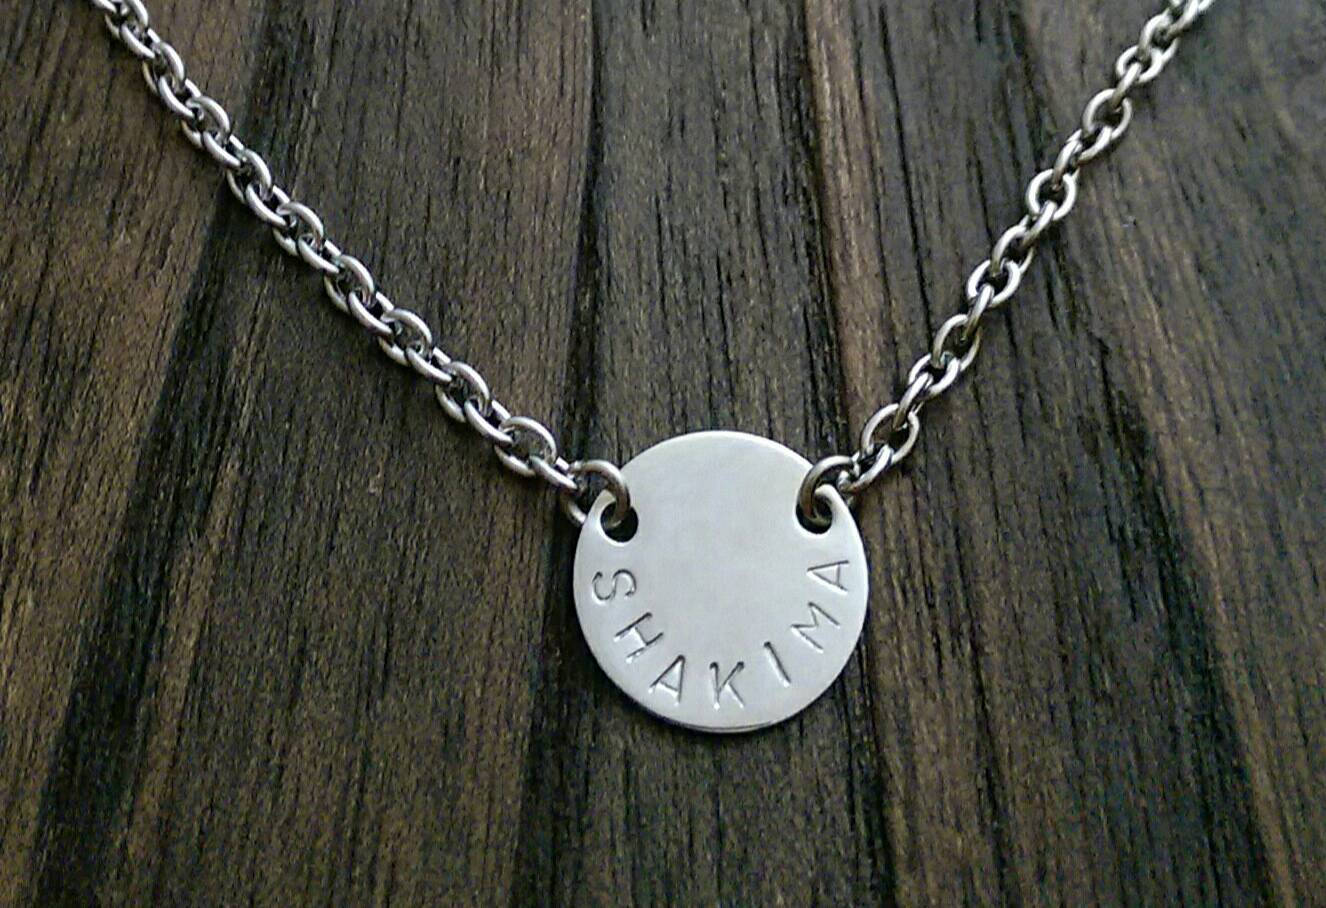 Personalised Necklace,  Hand Stamped Circle 15mm Disc Necklace Pendant Stainless Steel.